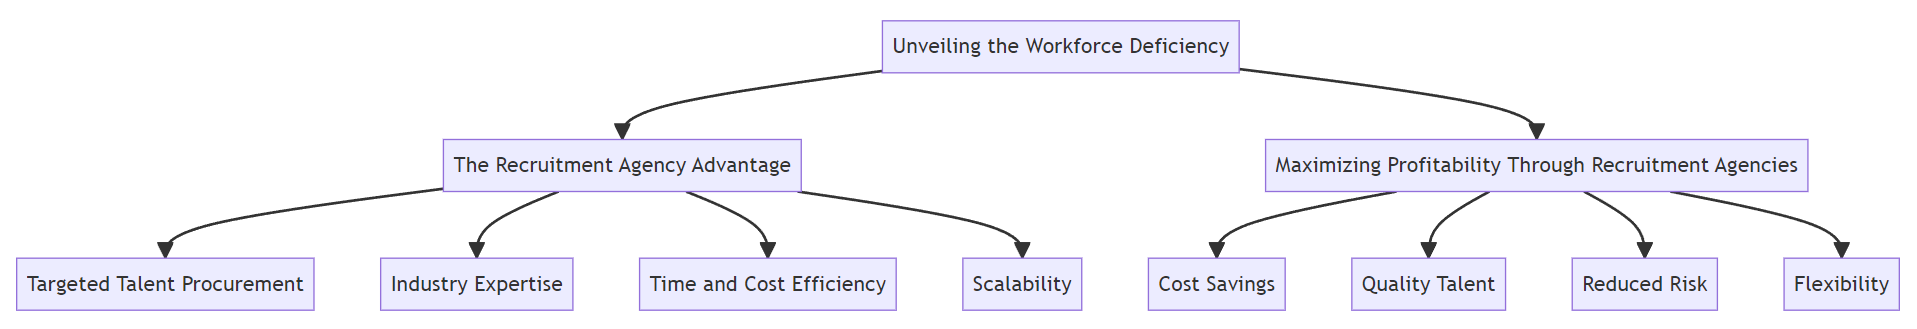 Diagram showing a flow chart surrounding the issues related to the workforce deficiency